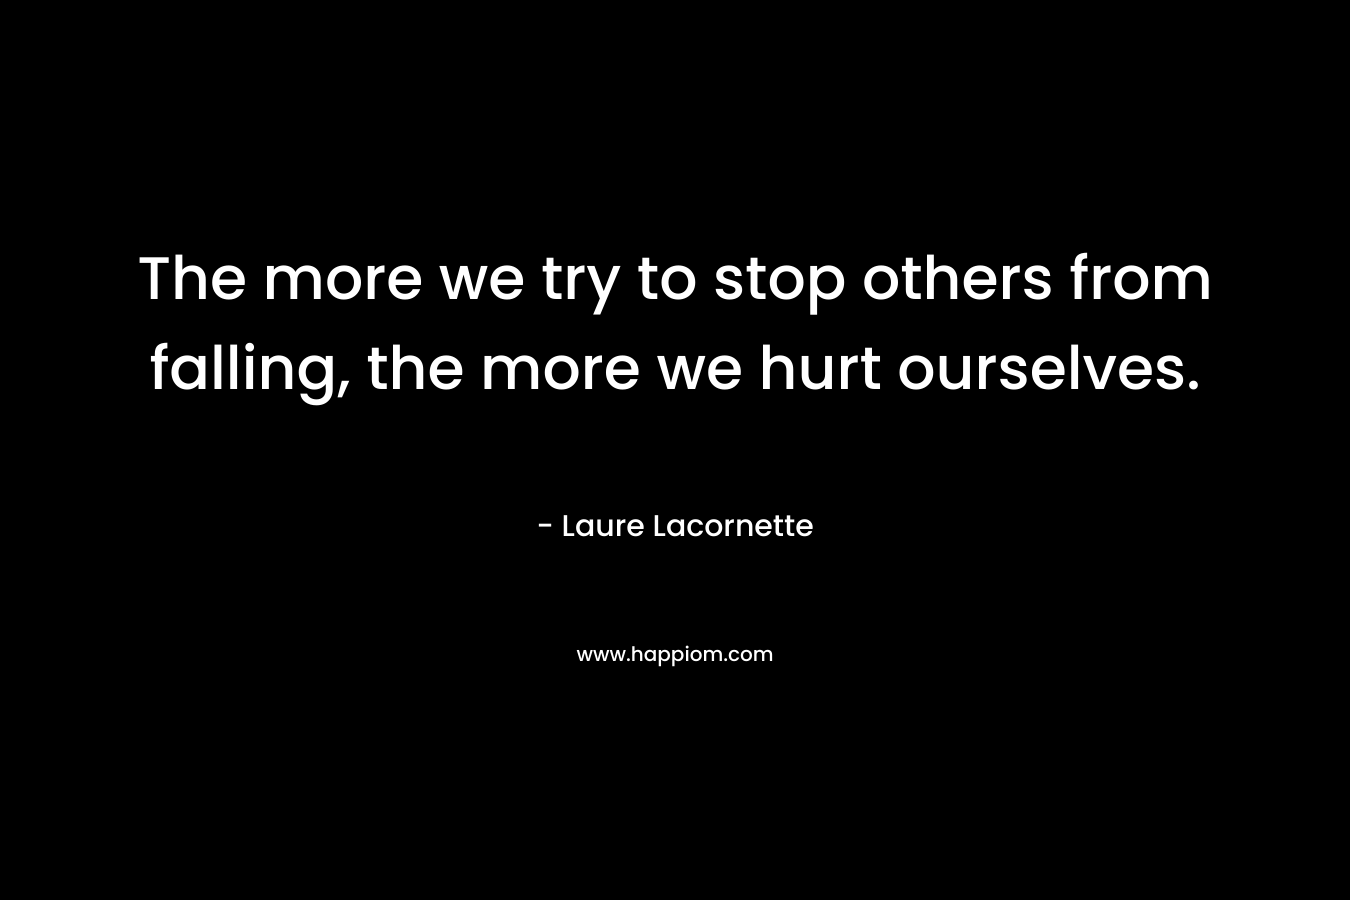 The more we try to stop others from falling, the more we hurt ourselves.